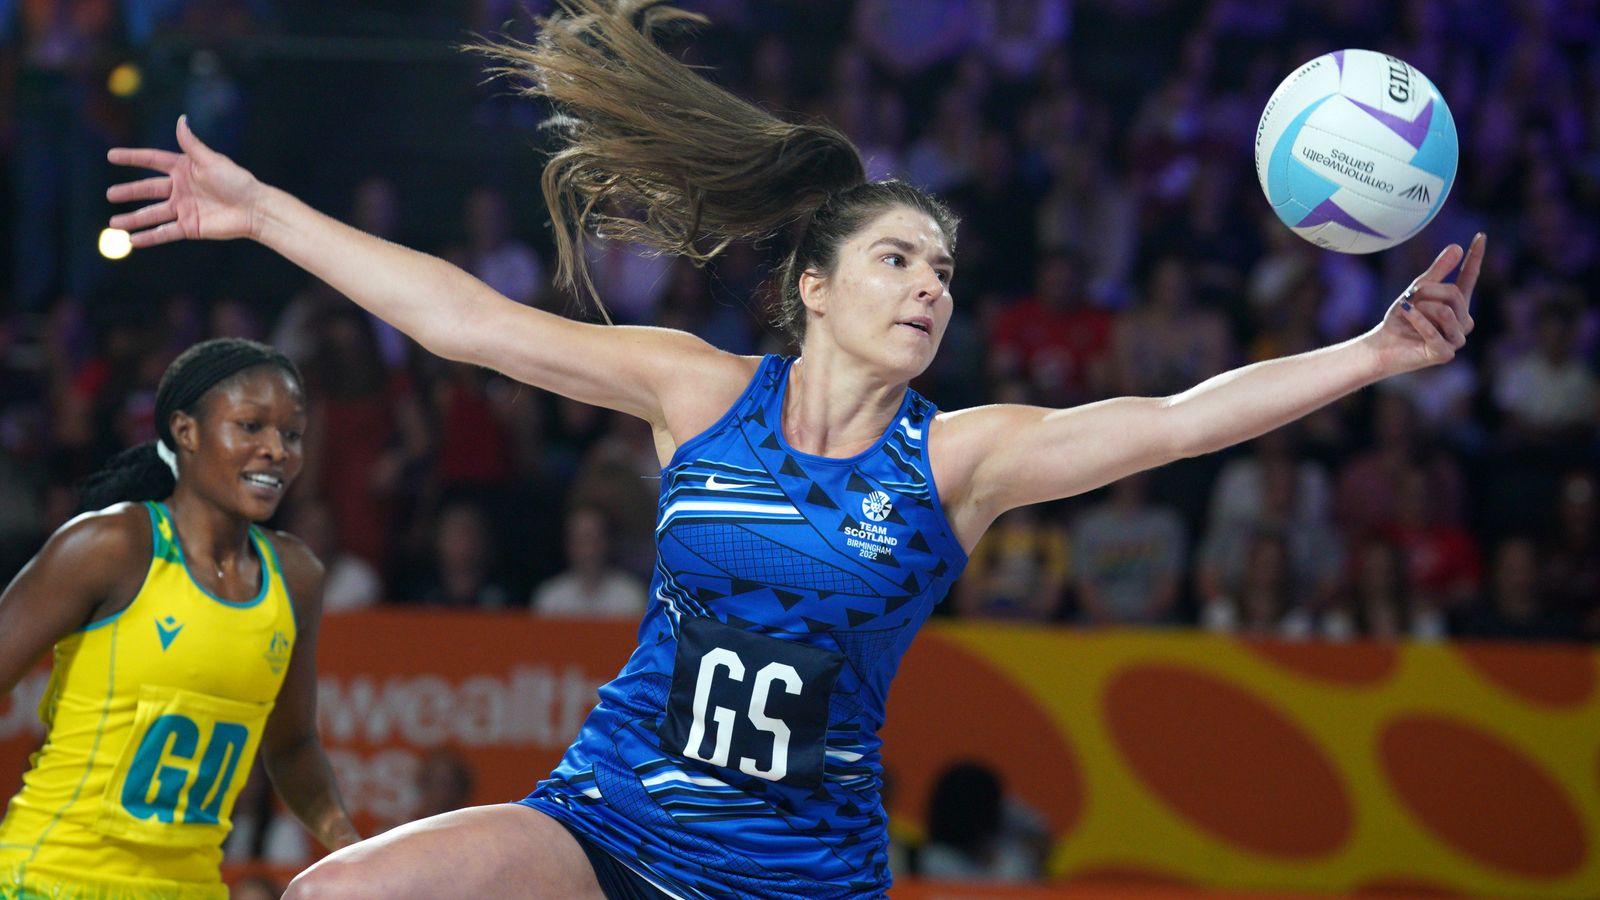 Fixtures announced for European Netball World Cup Qualifiers in Scotland